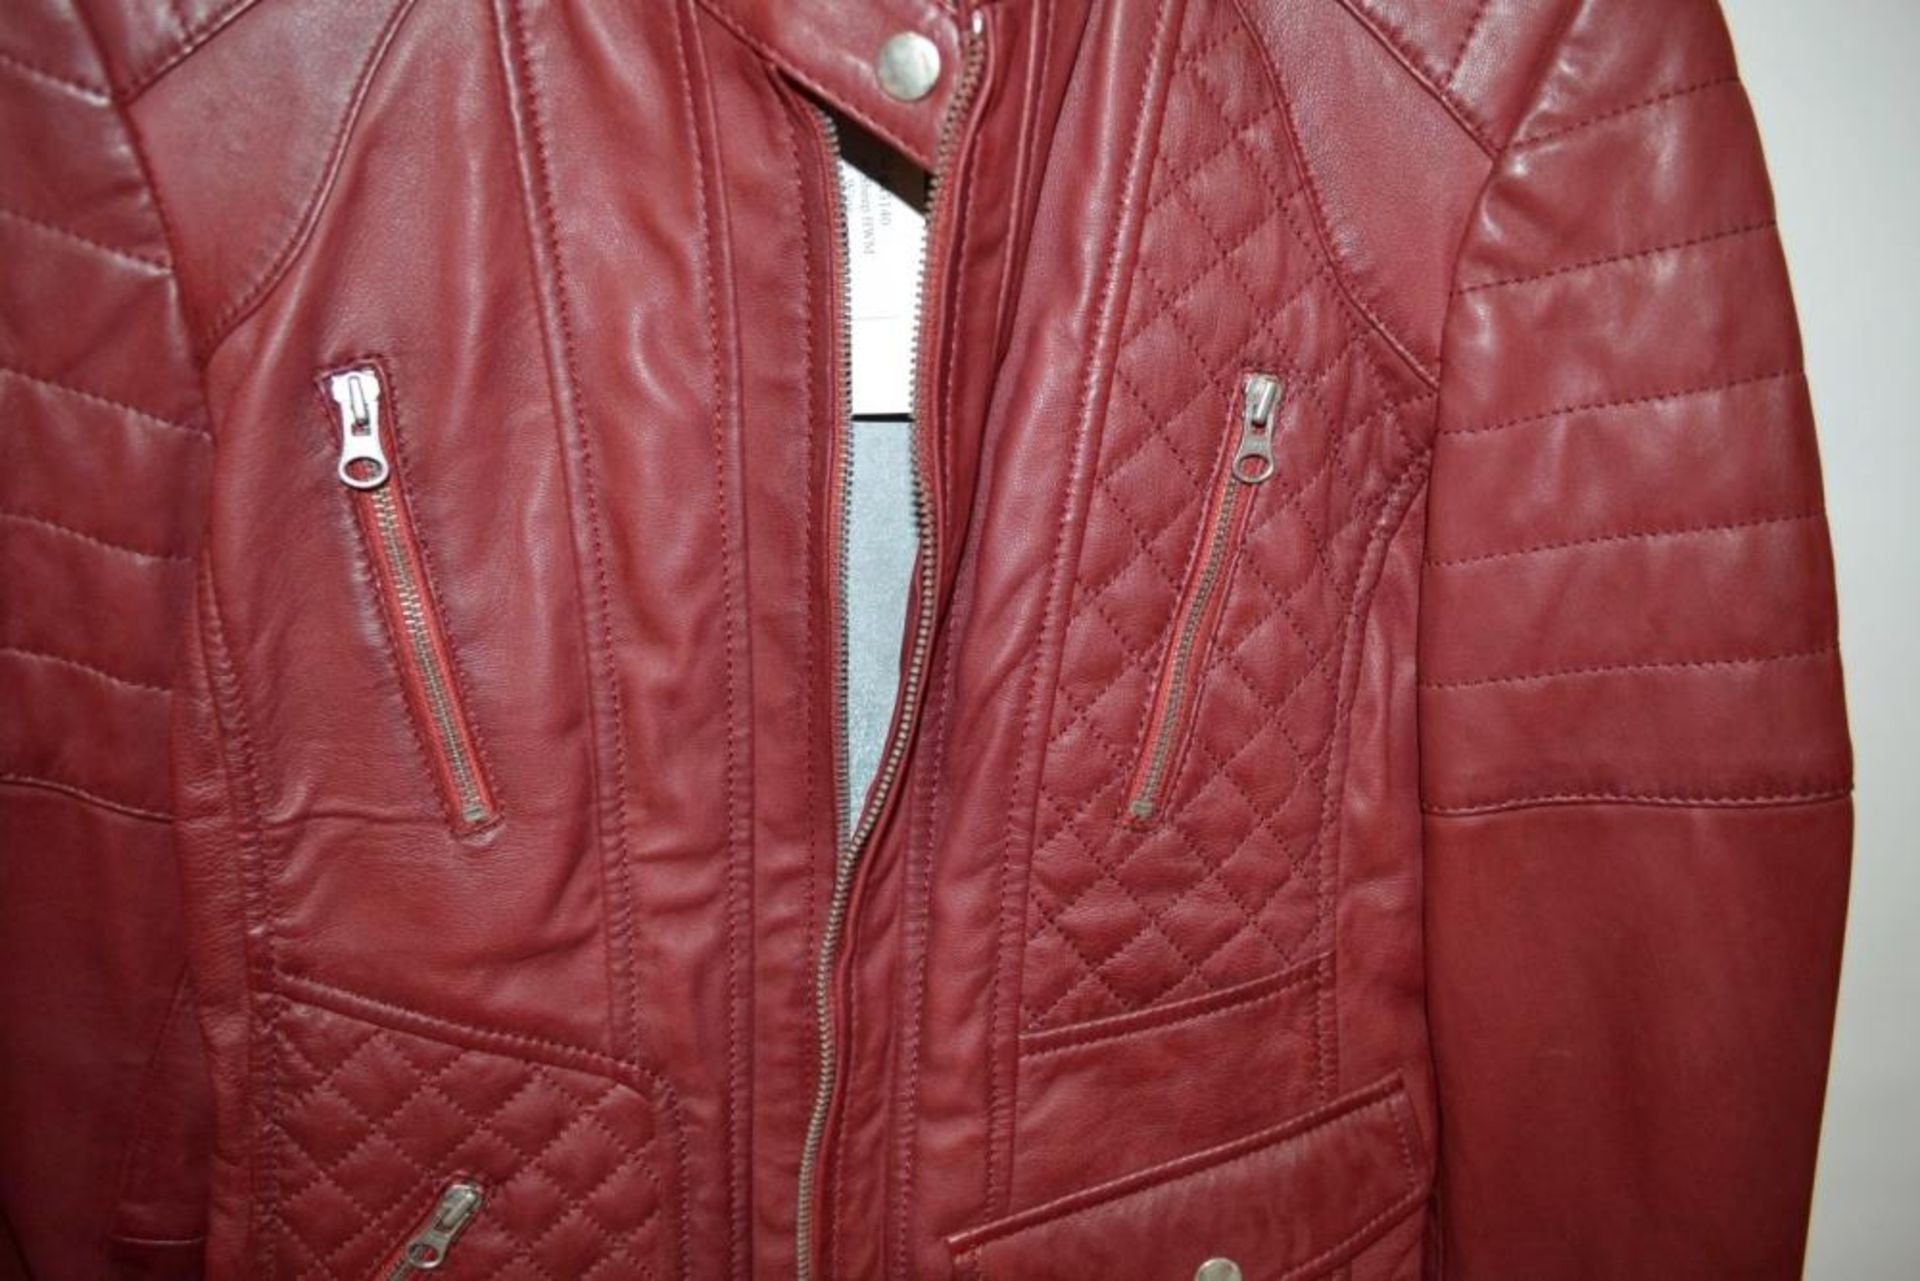 1 x Steilmann Bright Red Fine Leather Biker Jacket - Features Zipped Pockets And Padded Panels - CL2 - Image 4 of 7